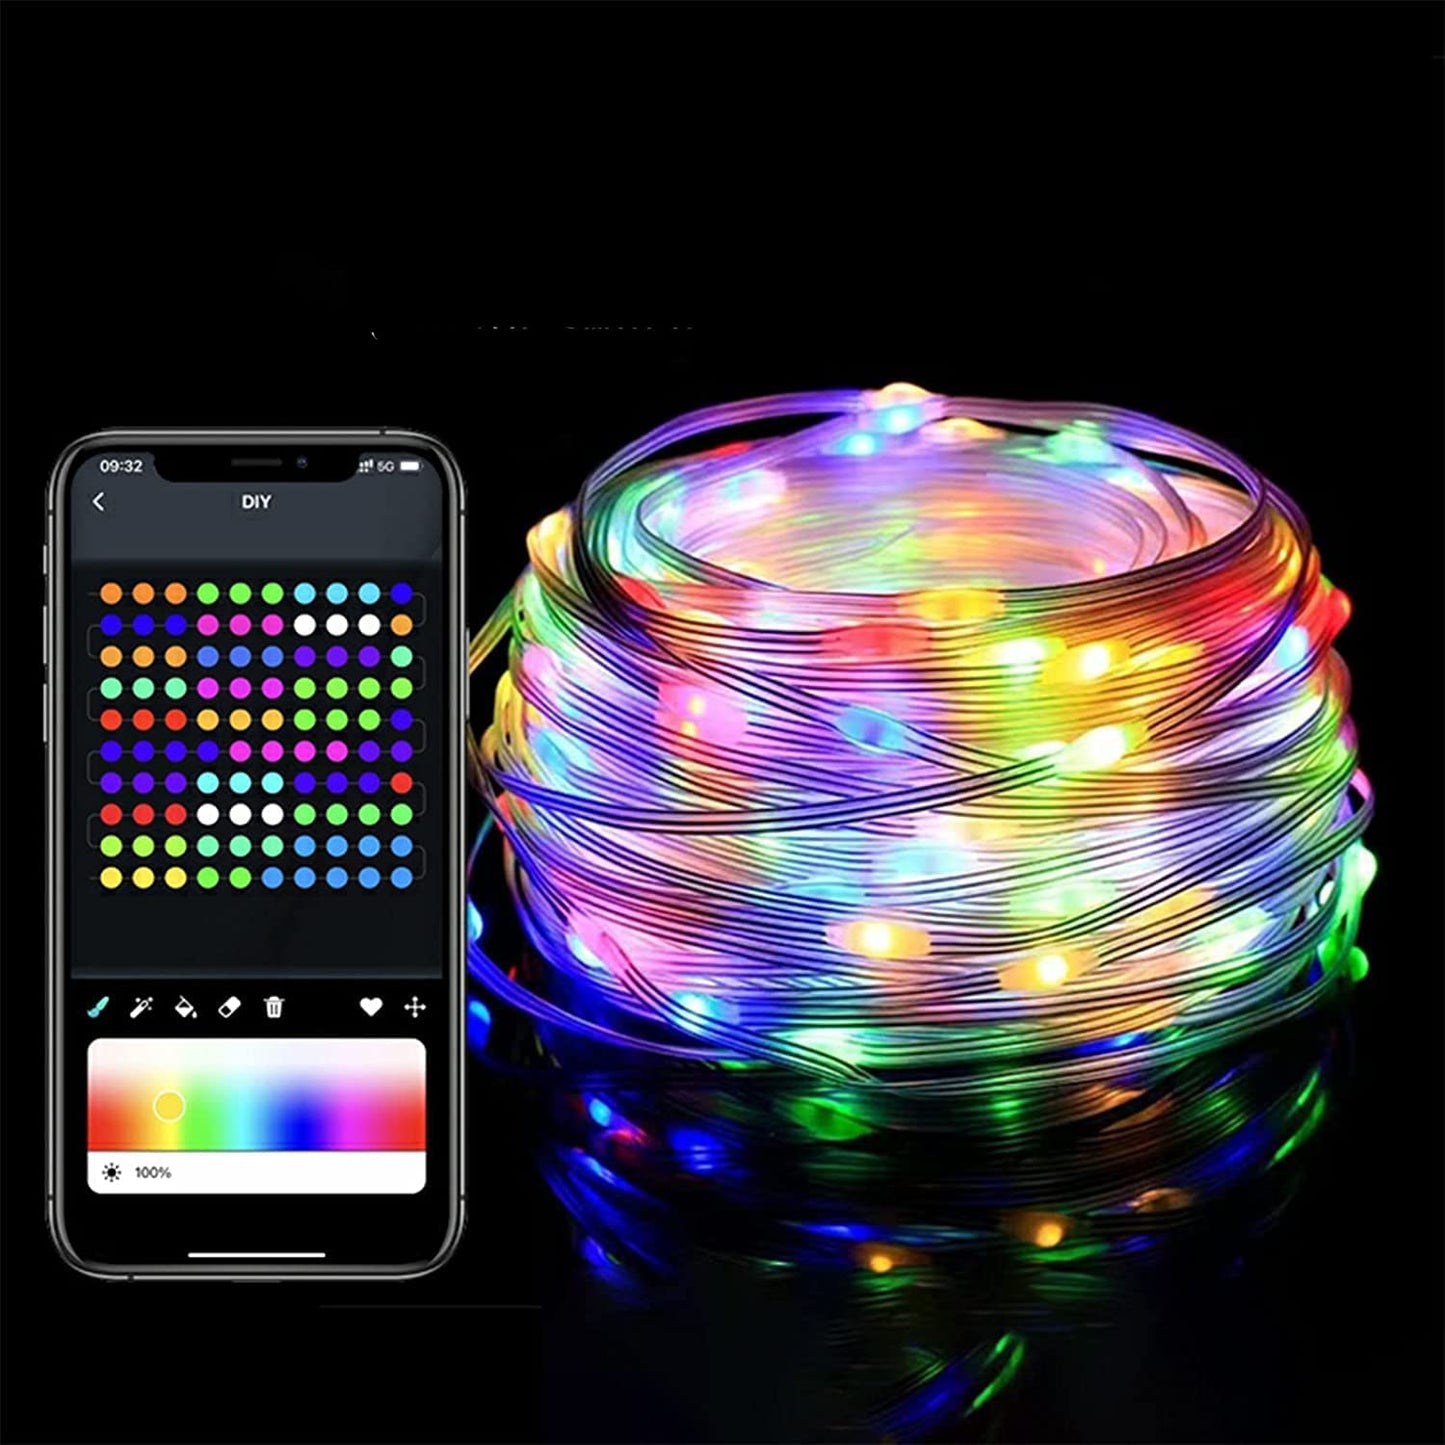 Fairy Lights RGB, 33 Ft 100 LED String Lights, Sync with Music, USB Powered, DIY Colors, 12 Specific Scenes, Waterproof IP65 for Outdoor and Indoor, for Christmas, Bedroom